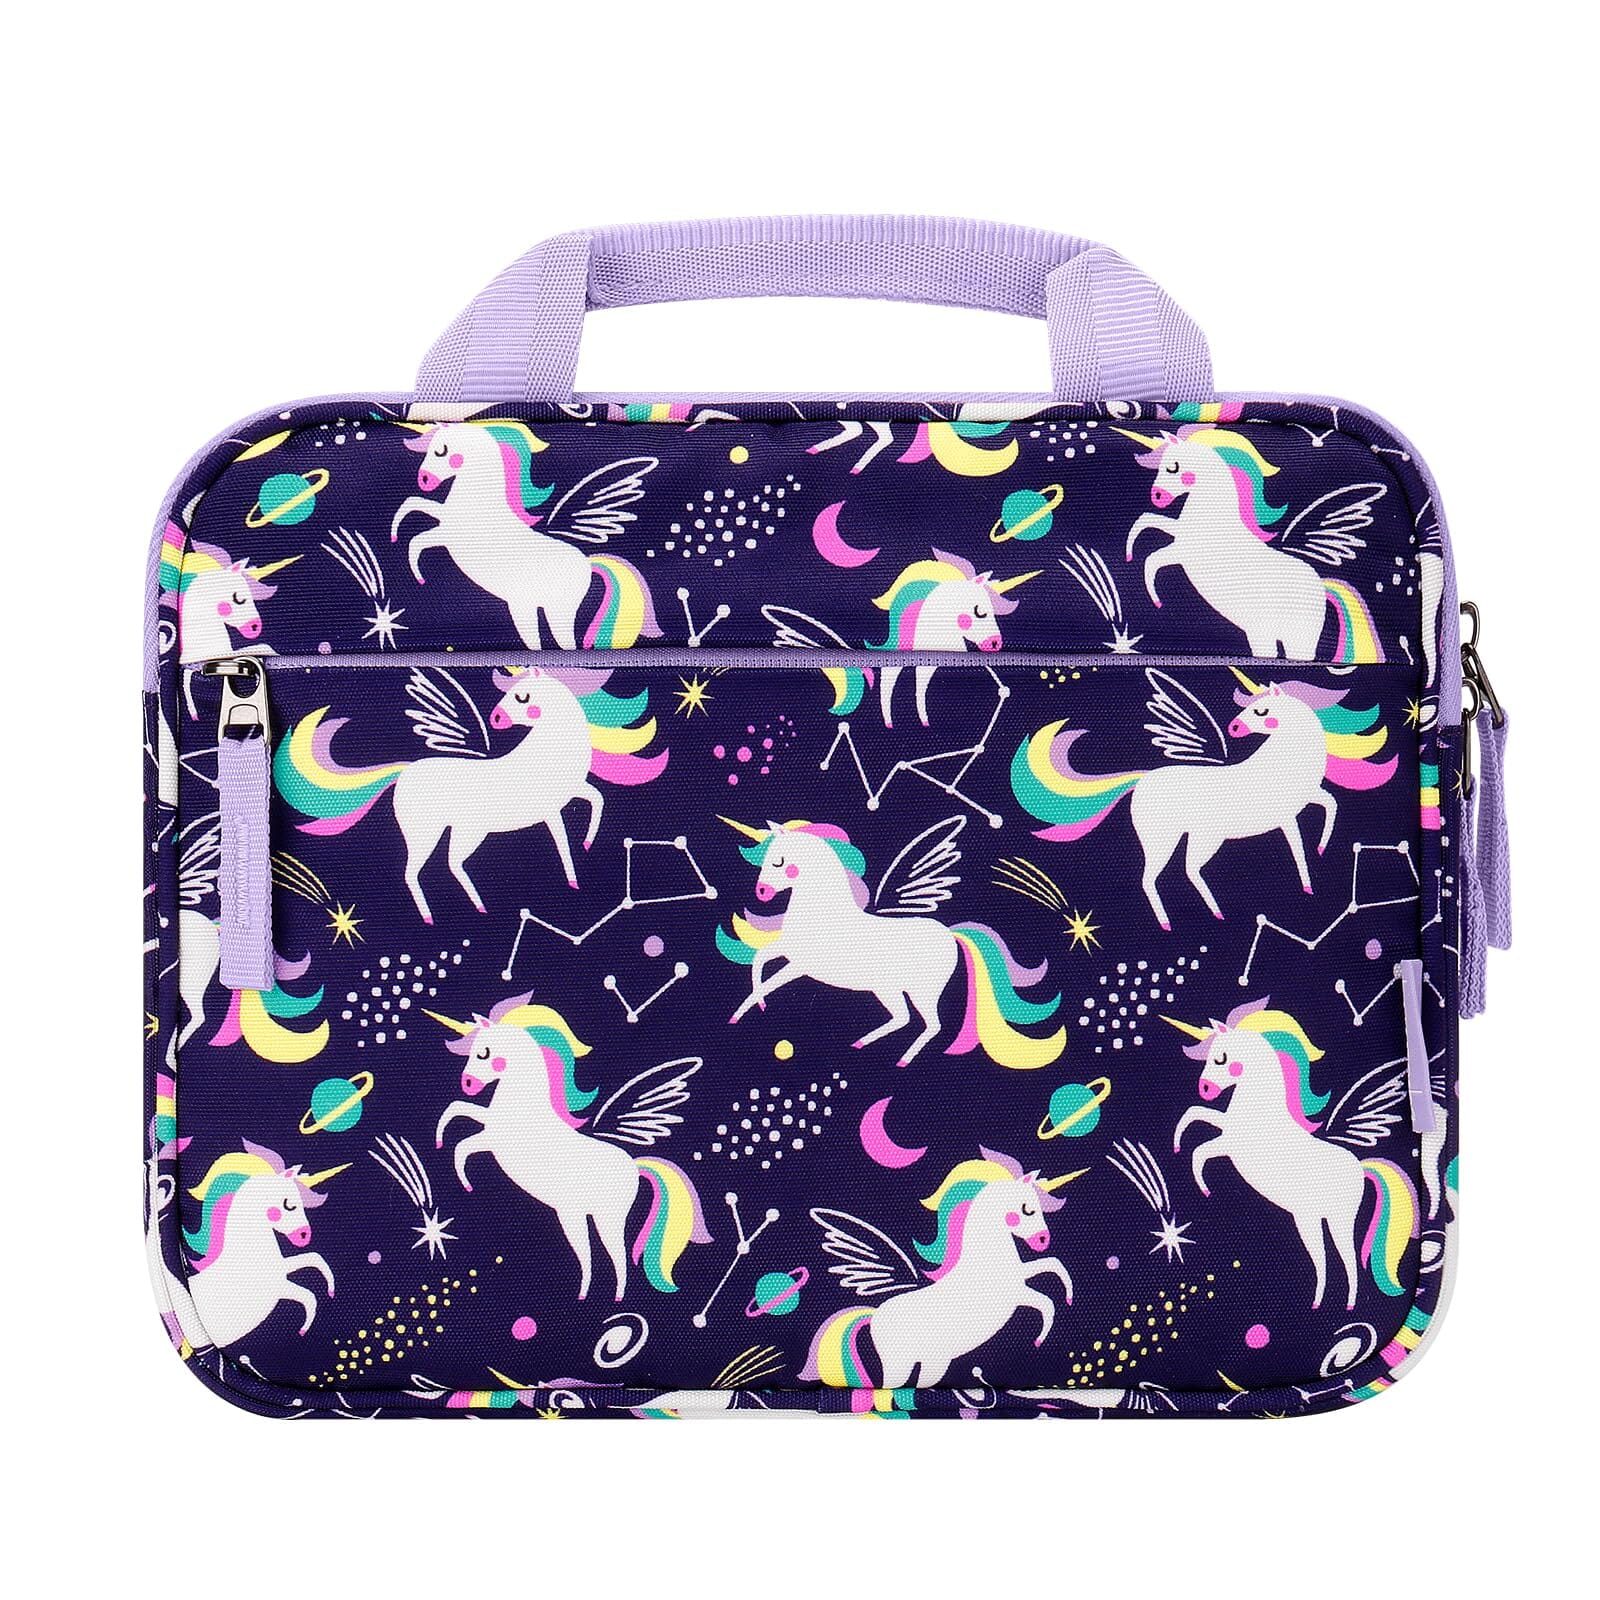 Choco Mocha 11 Inch Kids Tablet Sleeve Bag for Girls, Kids Tablet Carrying Case for Fire 7, Fire HD 8 Tablet, Kindle Kids Edition, iPad, Unicorn, Purple chocomochakids 